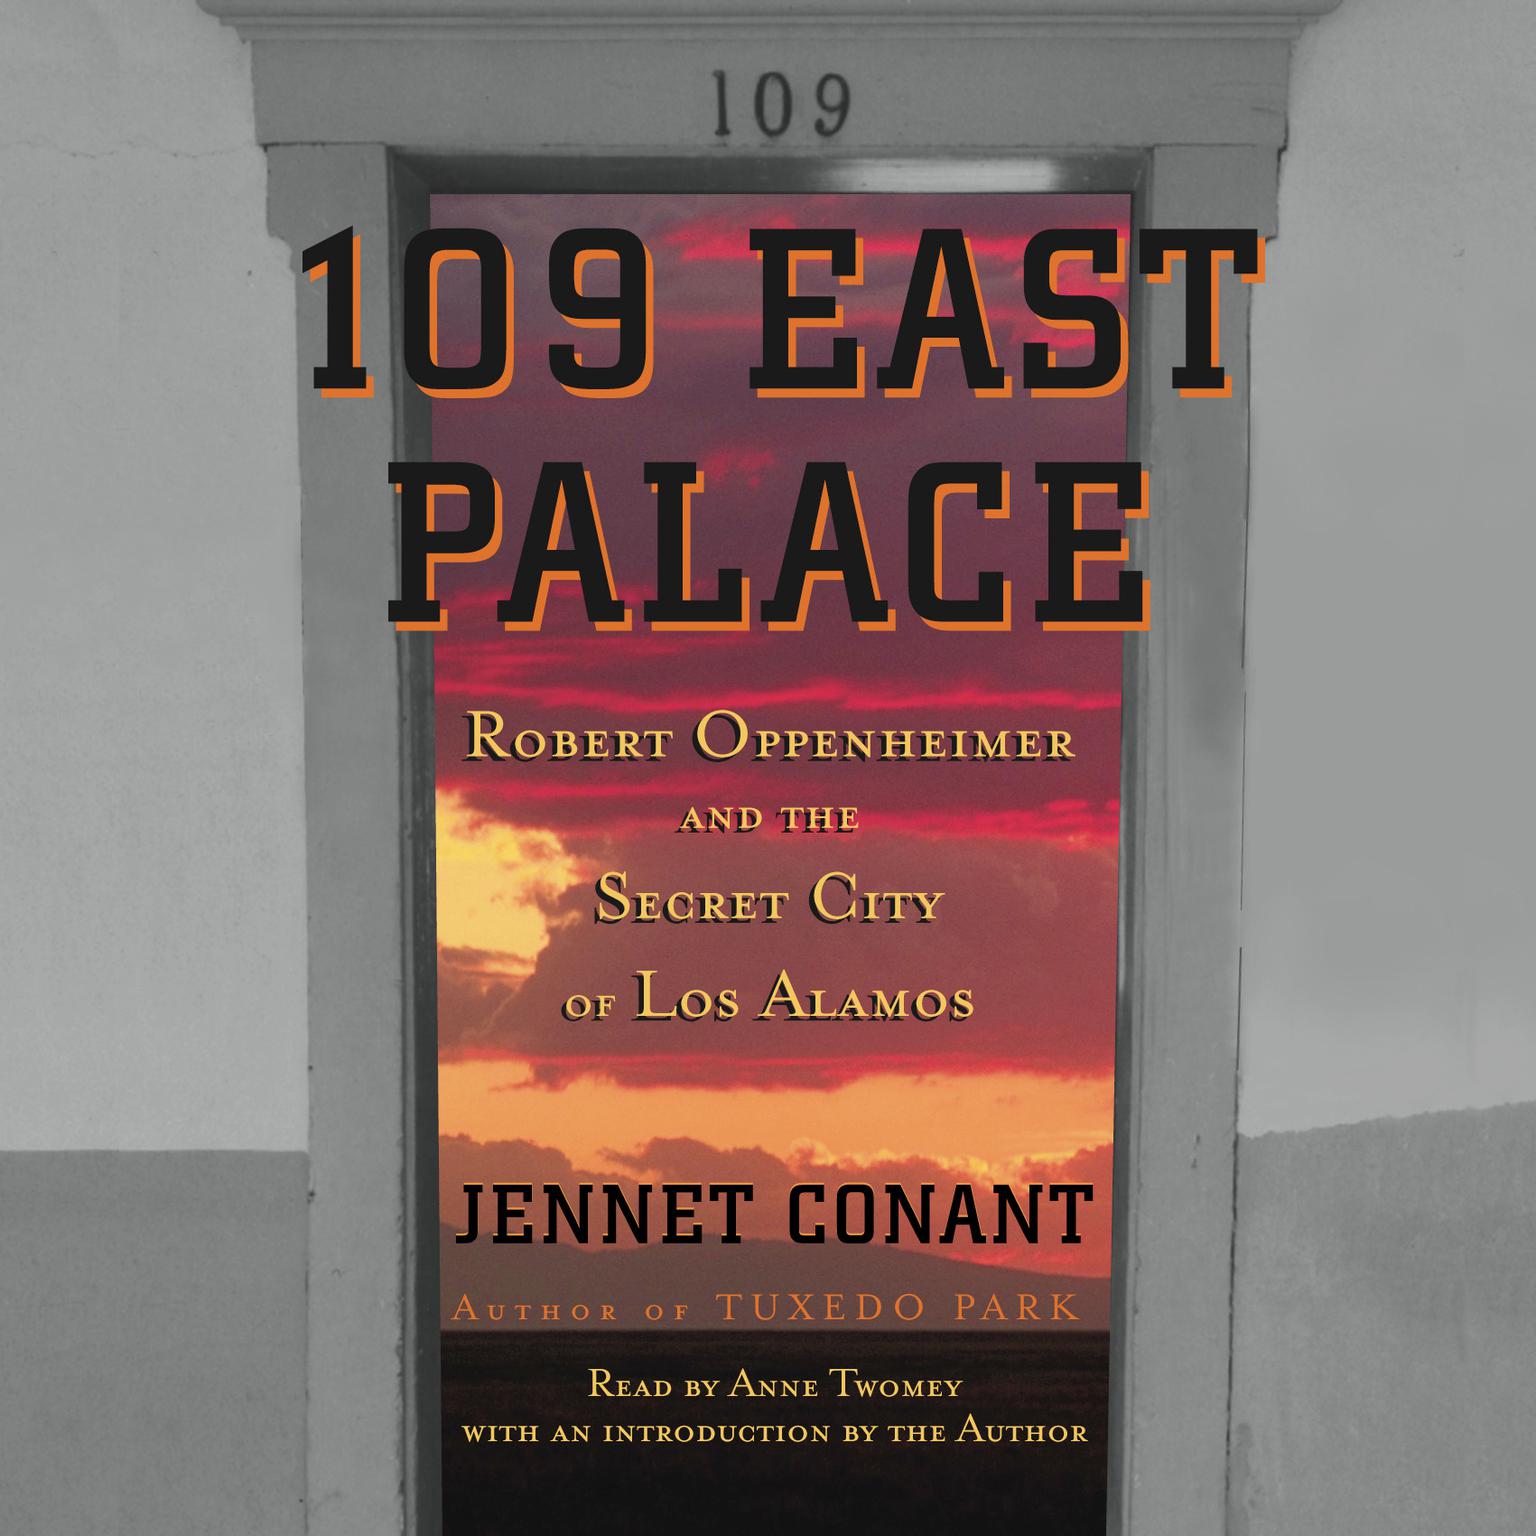 109 East Palace (Abridged): Robert Oppenheimer and the Secret City of Los Alamos Audiobook, by Jennet Conant